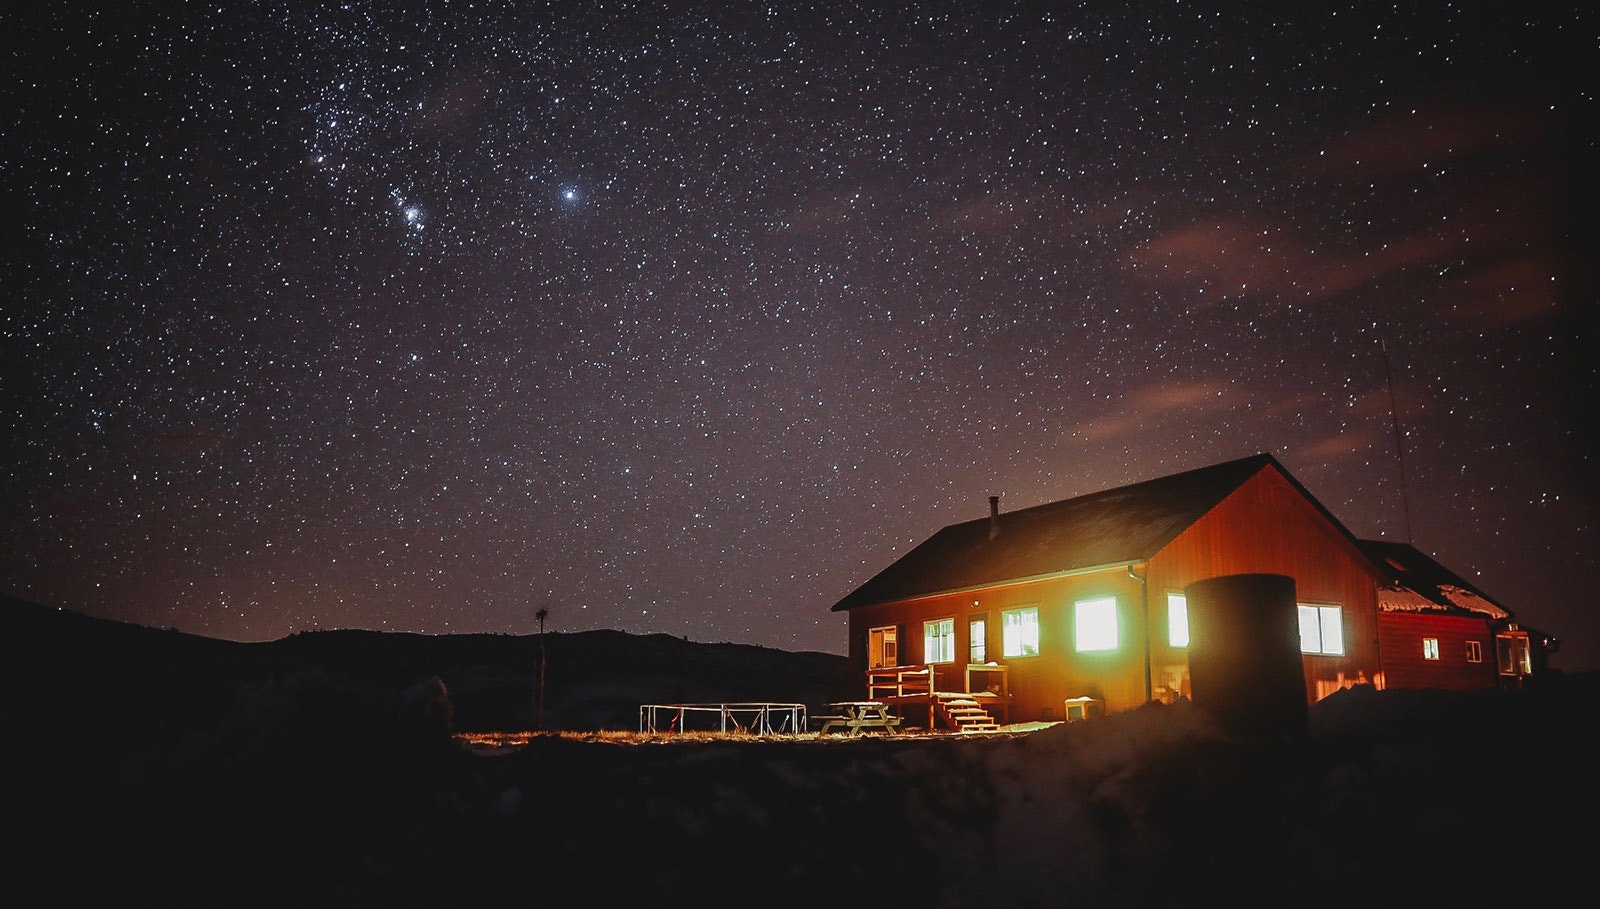 Josh Winkler’s off-grid cabin in remote Lincoln County on a clear winter night.